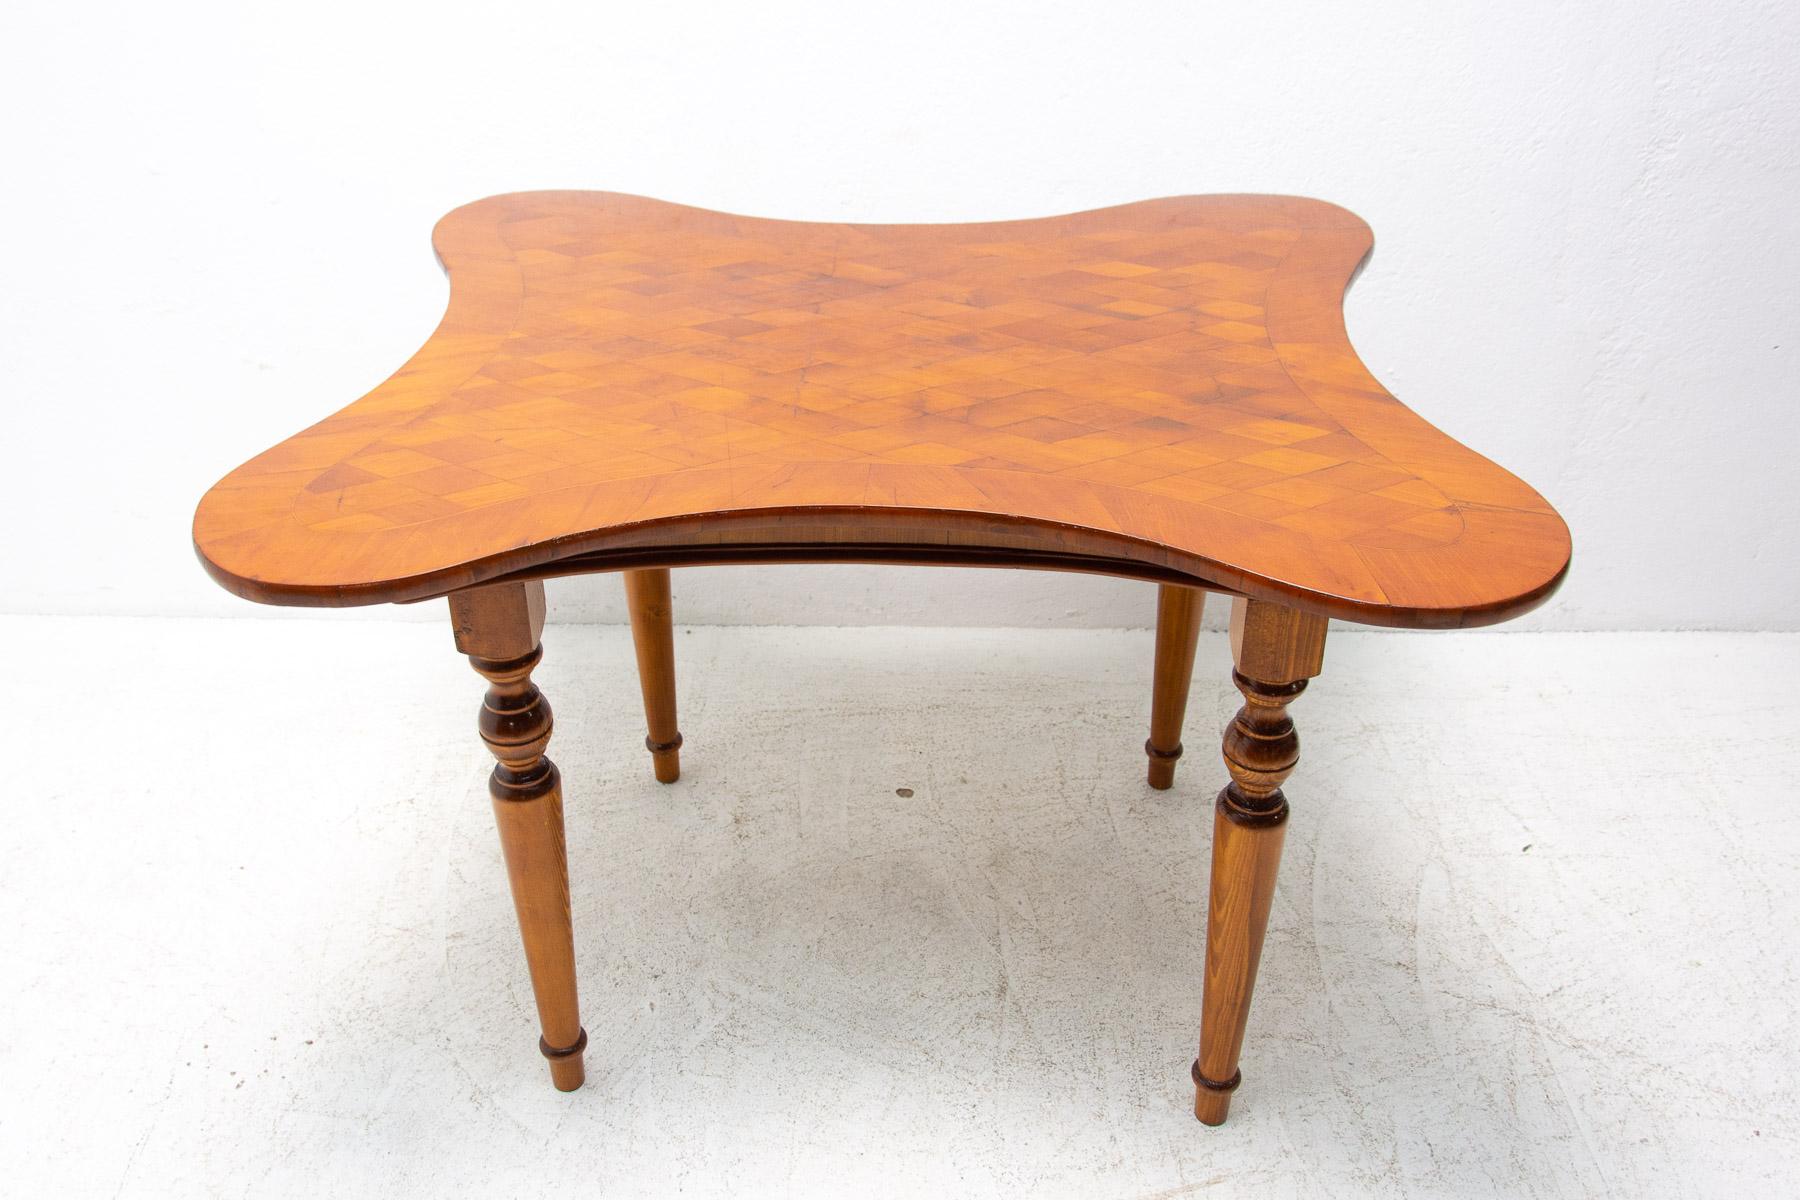 Neo-Baroque Butterfly Dining Table, Austria-Hungary In Good Condition For Sale In Prague 8, CZ